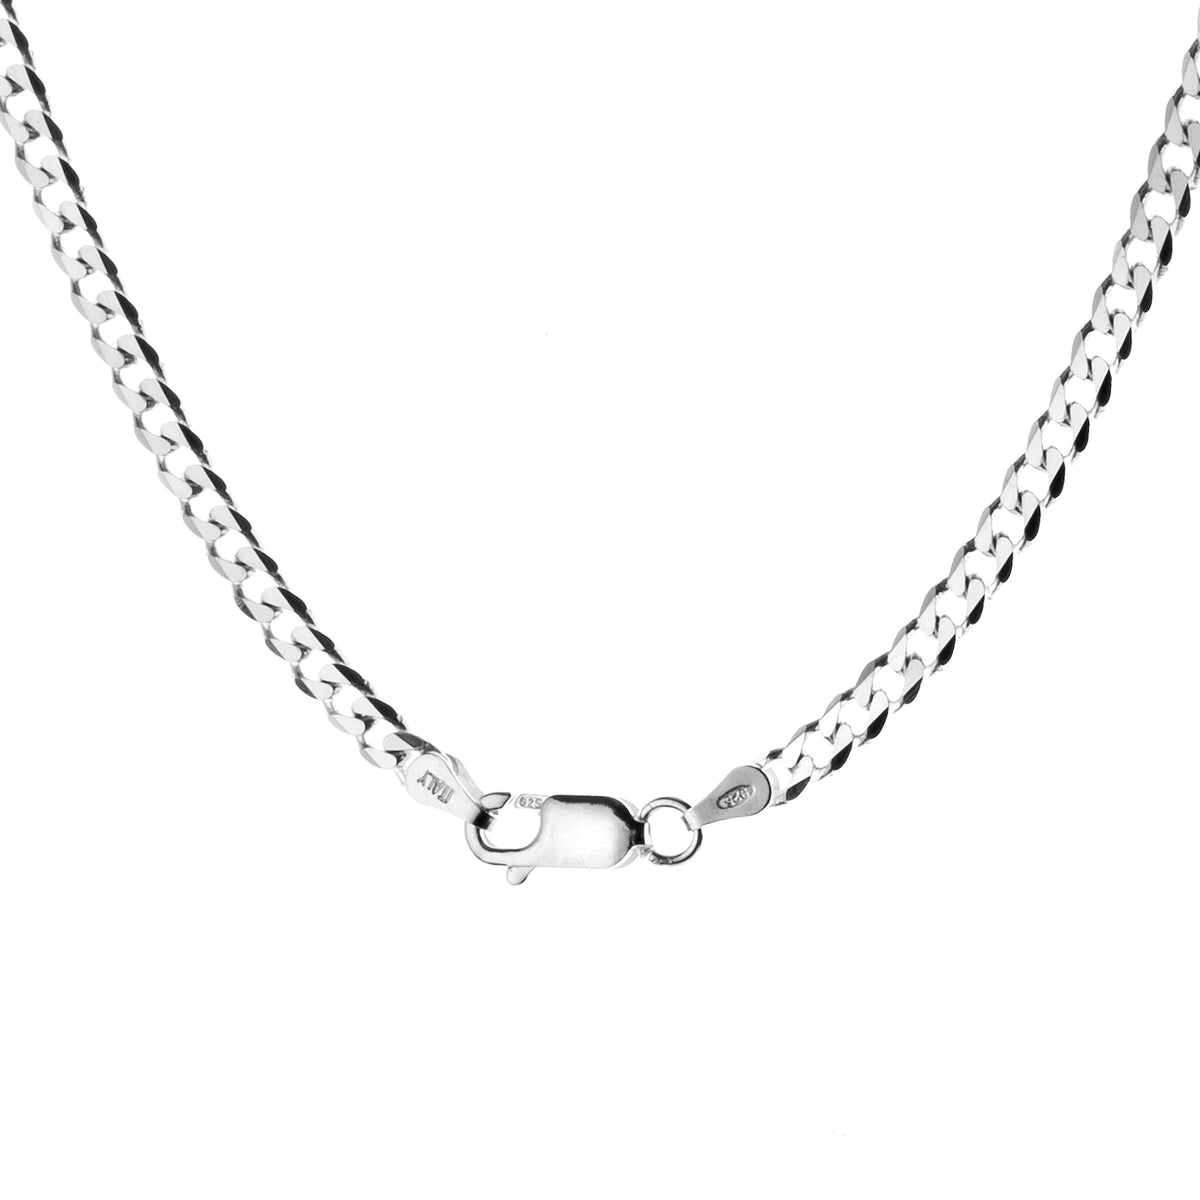 Silver Necklaces & Chains | Brighton Silver - North Laine Jewellers